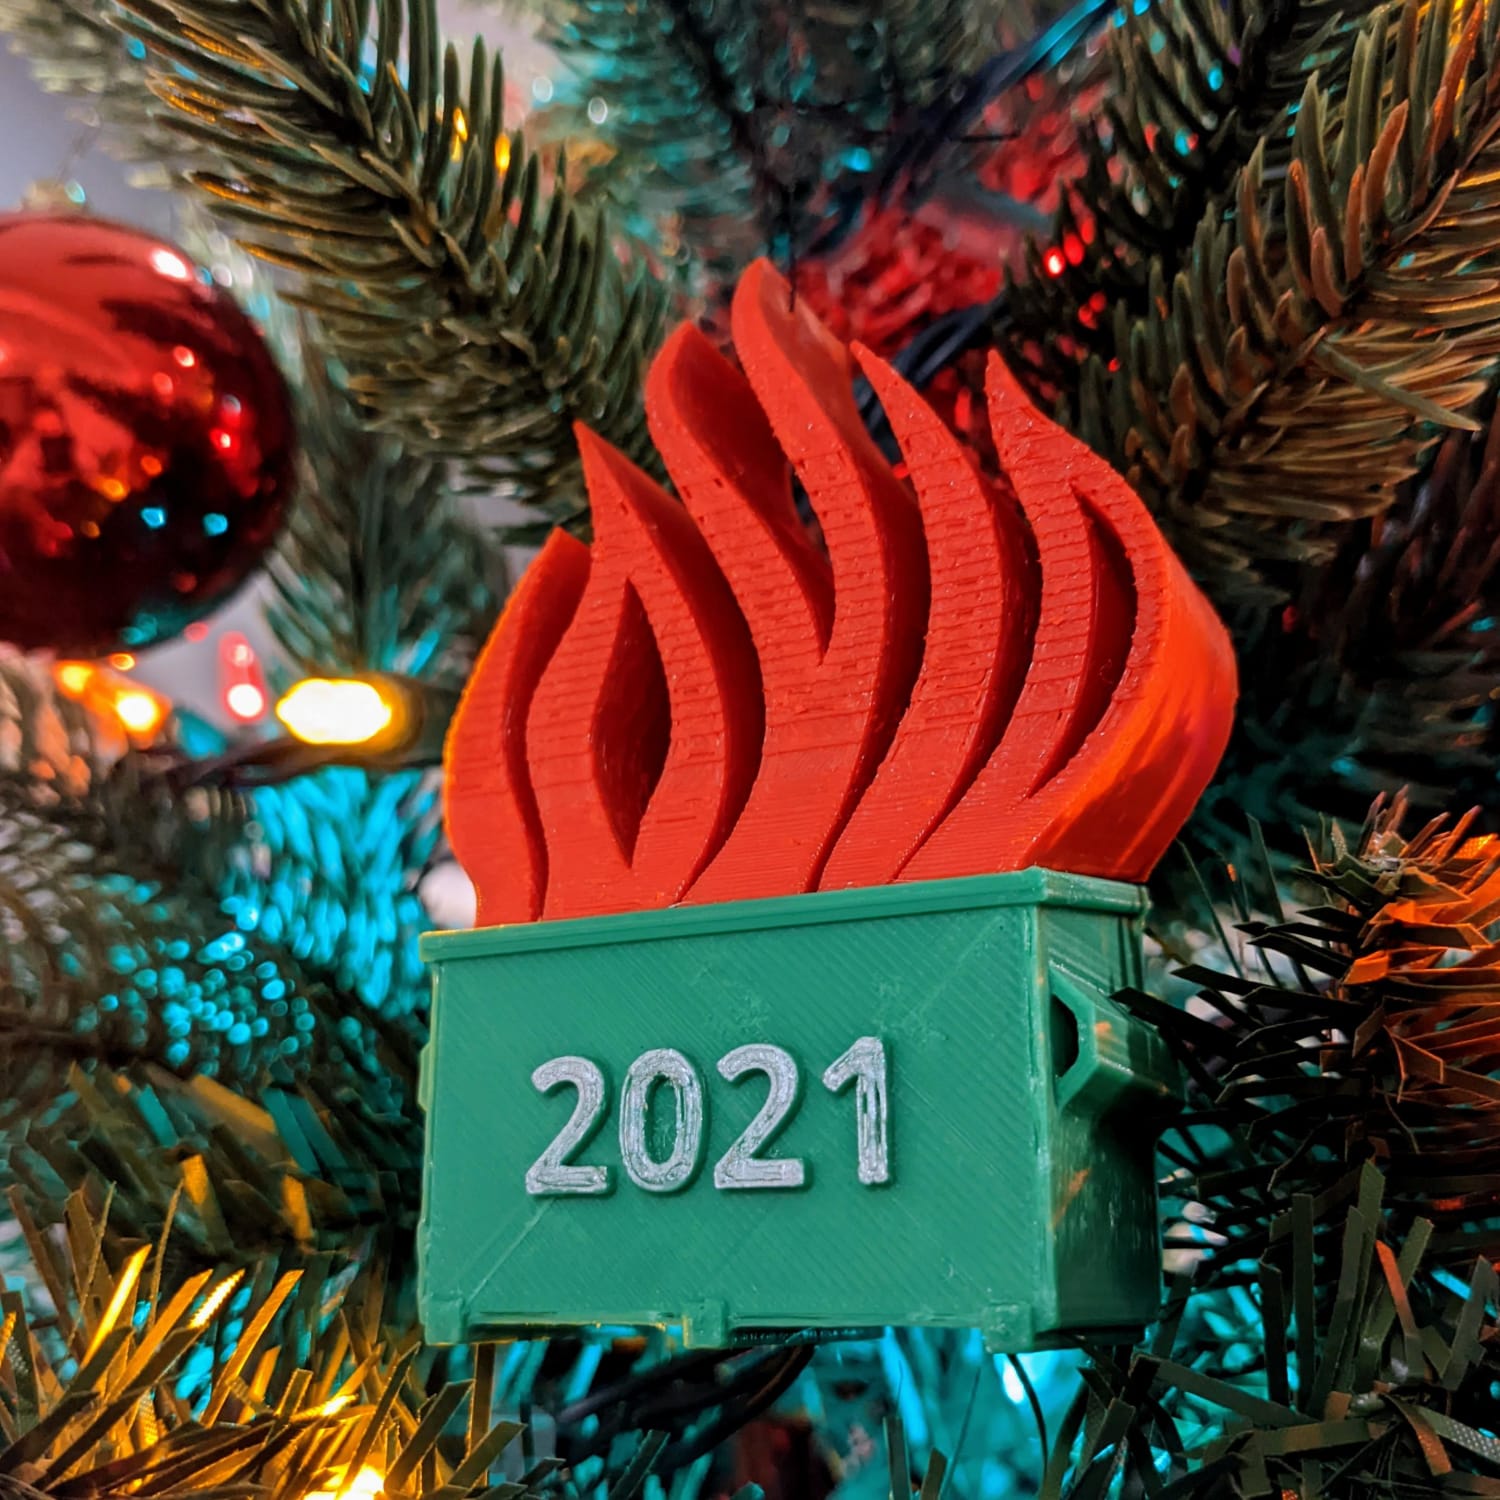 I made everyone an ornament to celebrate another year of insanity. Enjoy! (Link in comments)